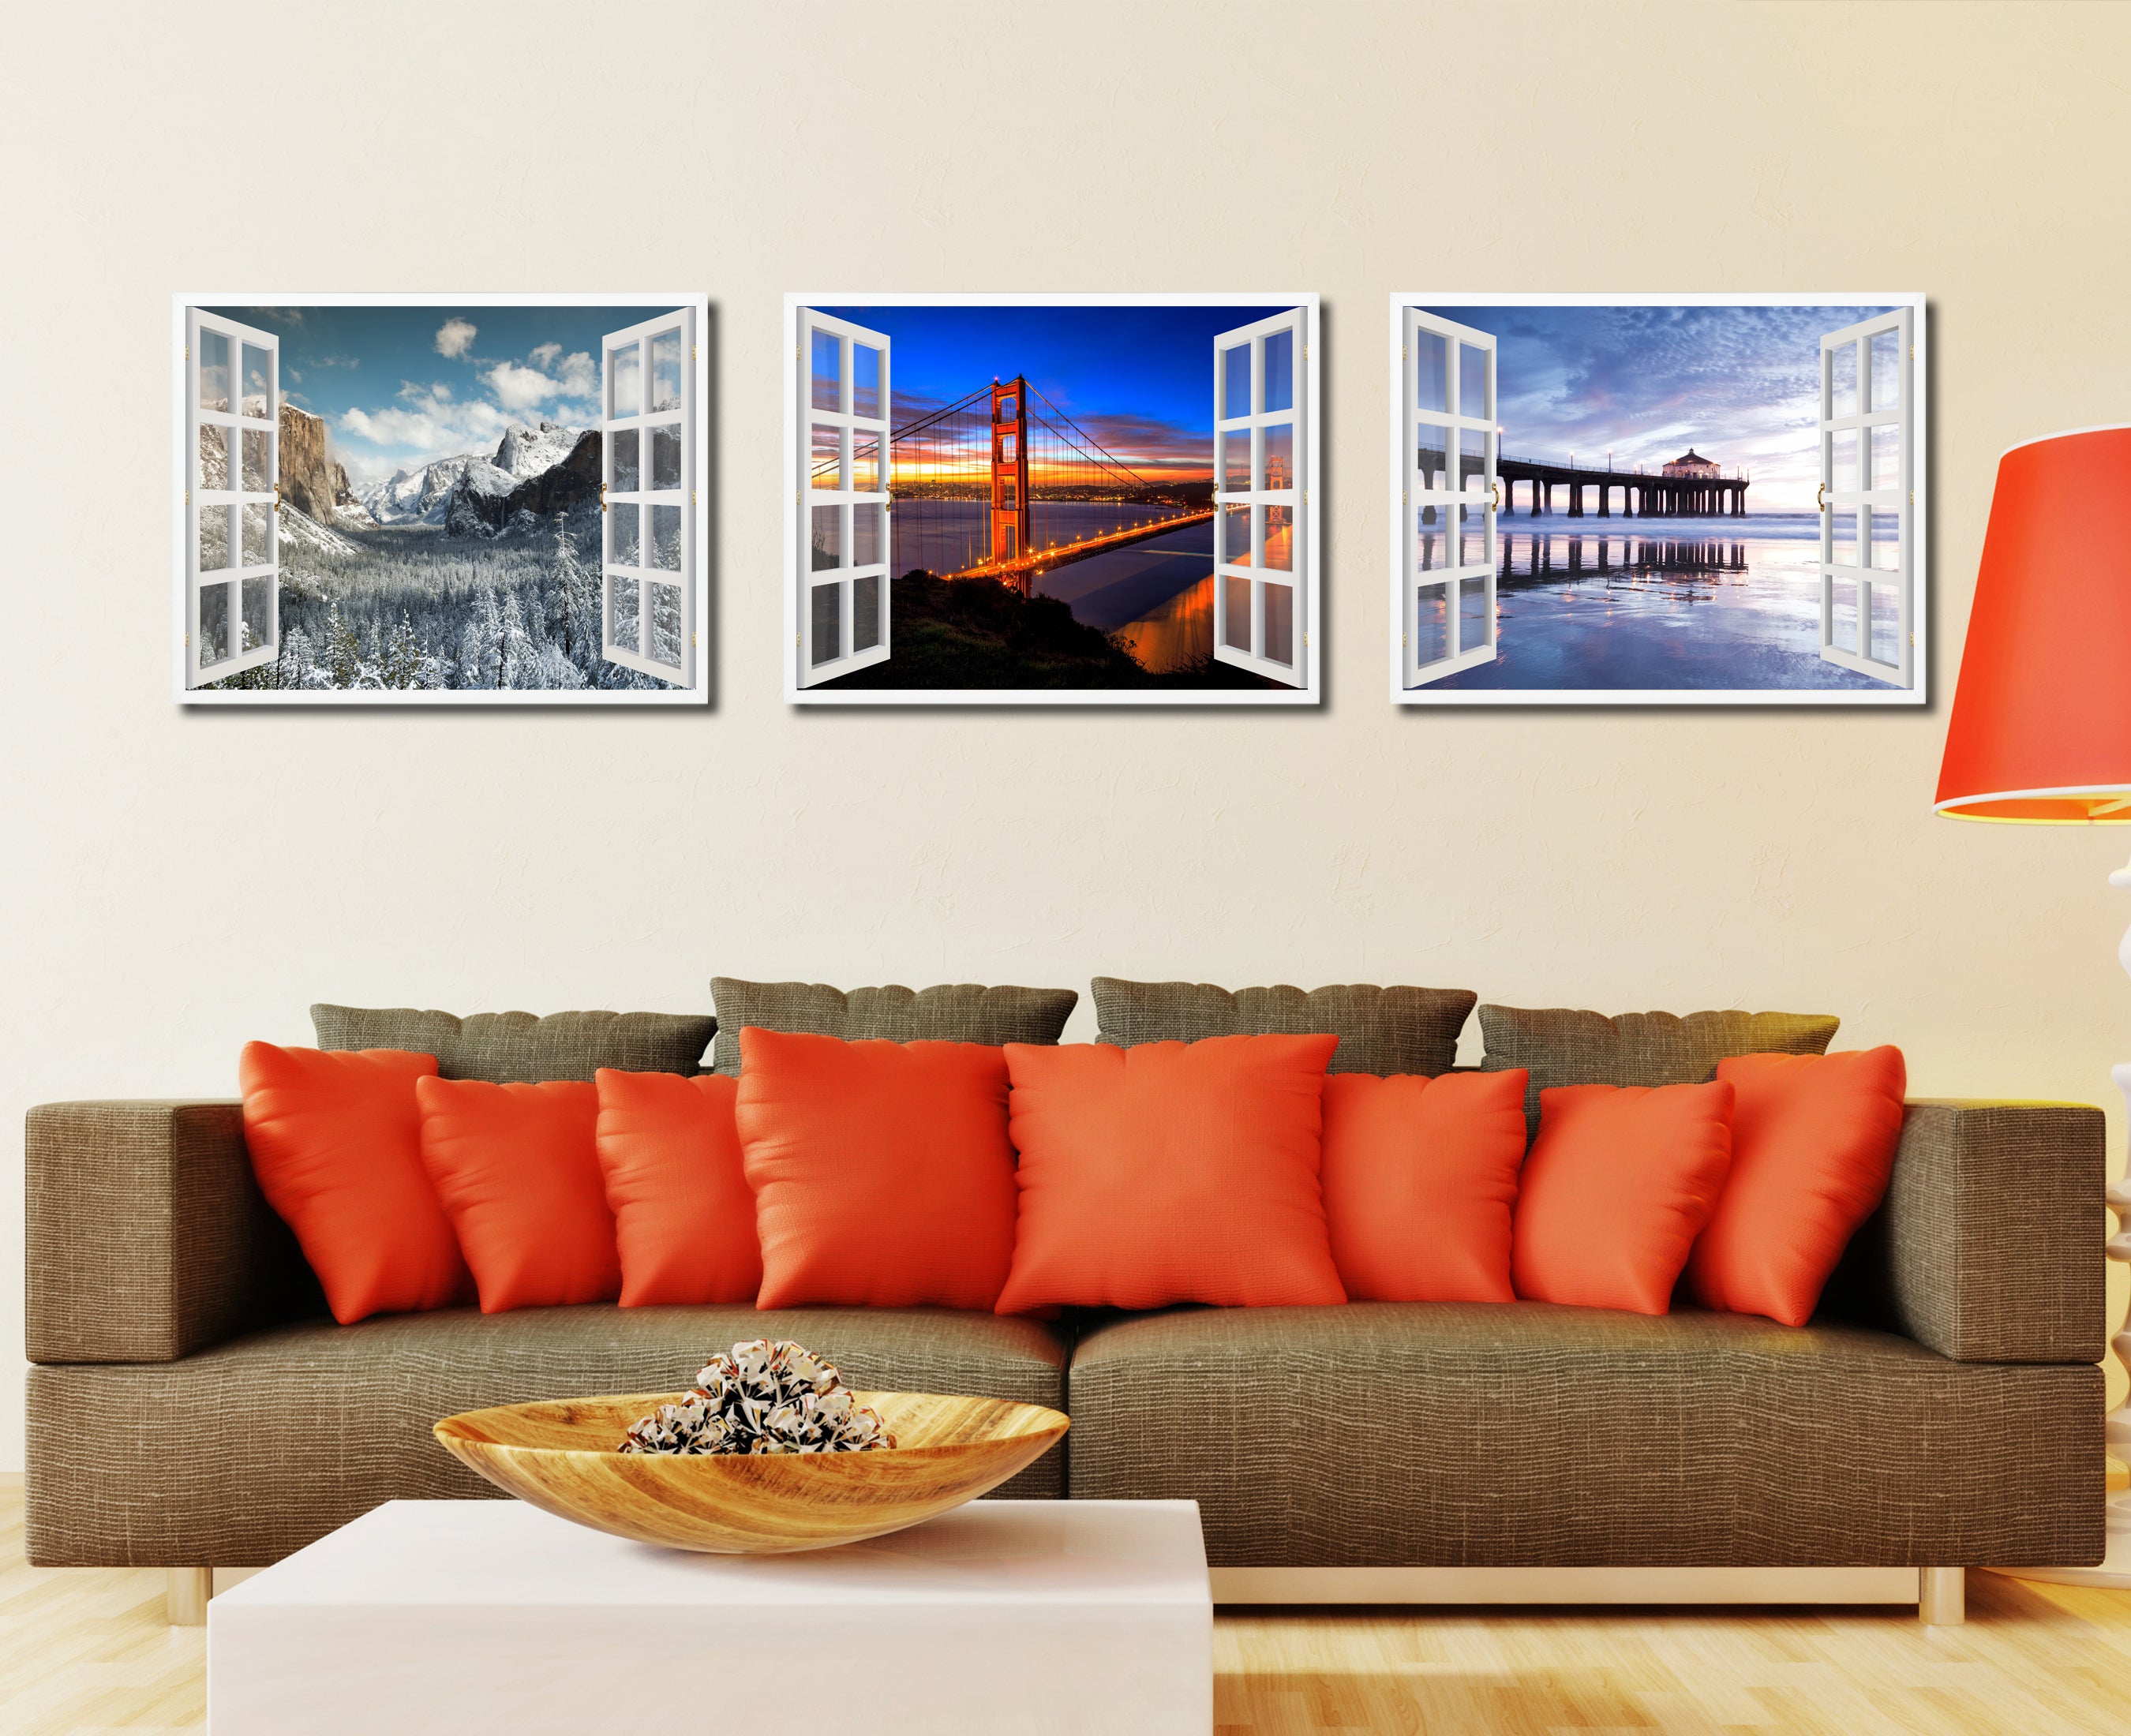 Golden Gate Bridge San Francisco California Sunset Picture French Window Framed Canvas Print Home Decor Wall Art Collection